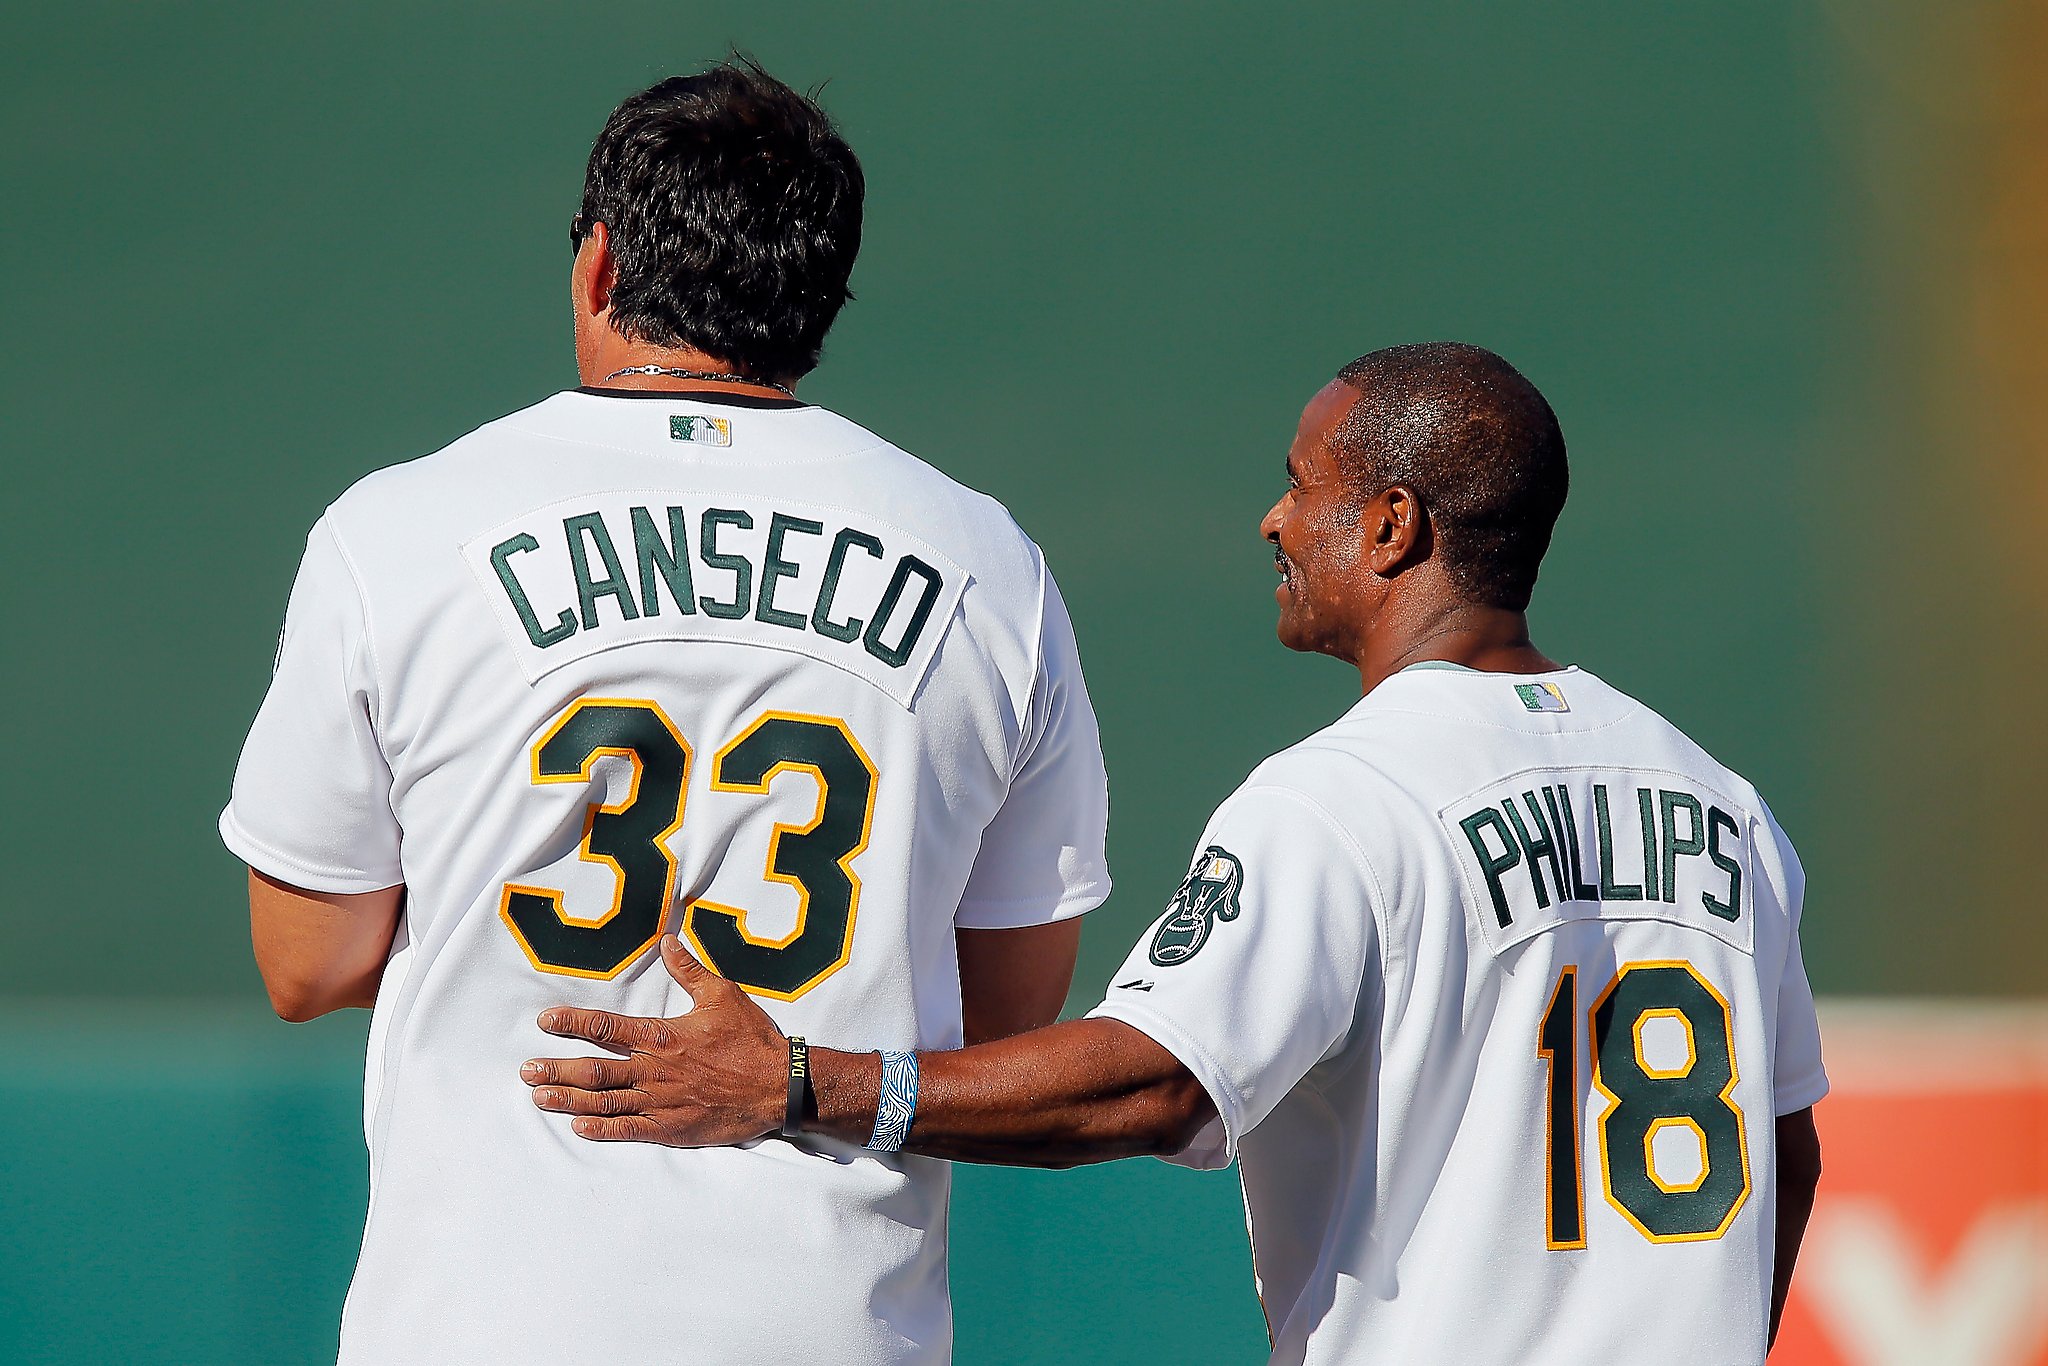 Jose Canseco in his return to the Oakland A's in 1997. The reunion